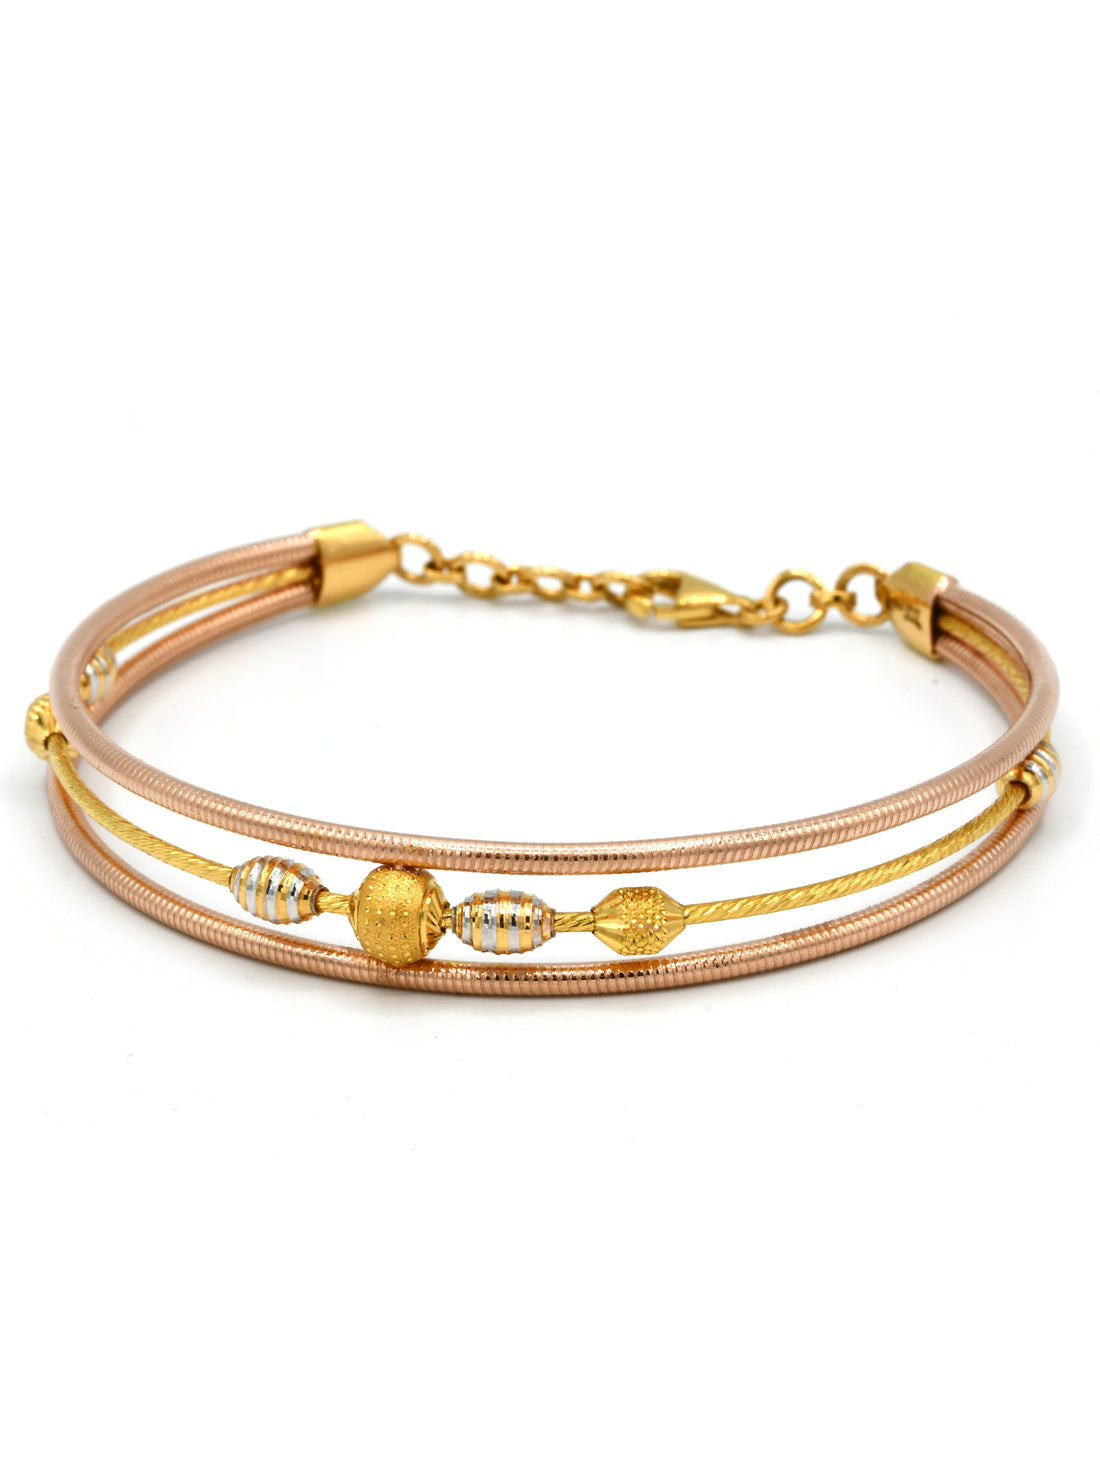 22ct Rose Gold Two Tone 1 Piece Bangle - Roop Darshan